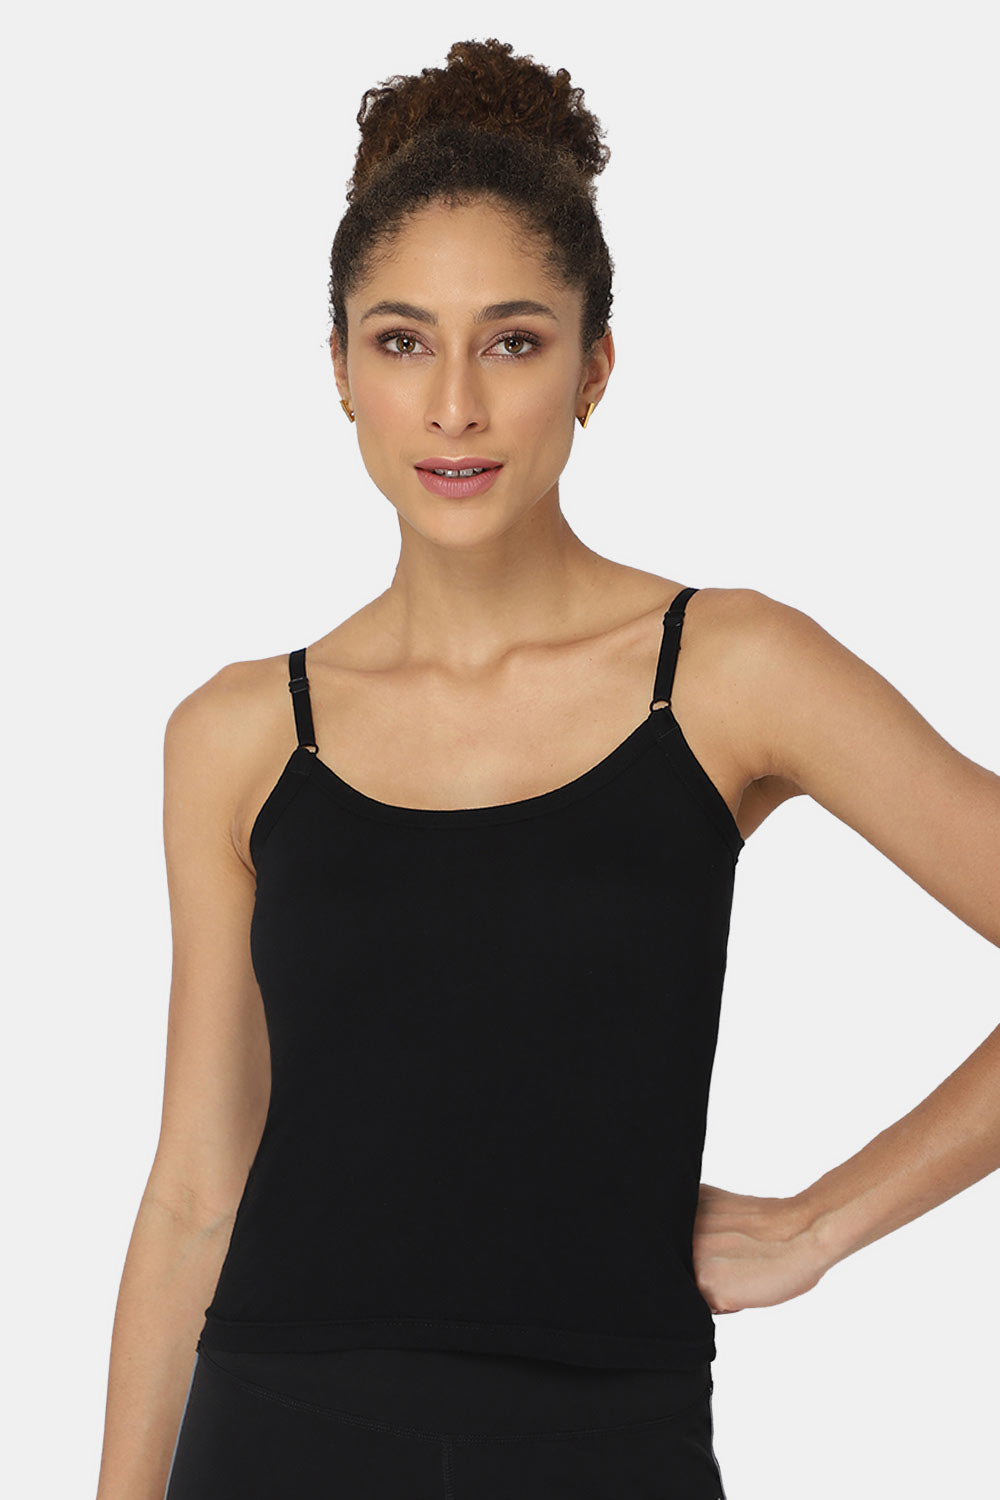 Intimacy Camisole-Slip Special Combo Pack - In05 - Pack of 3 - C34